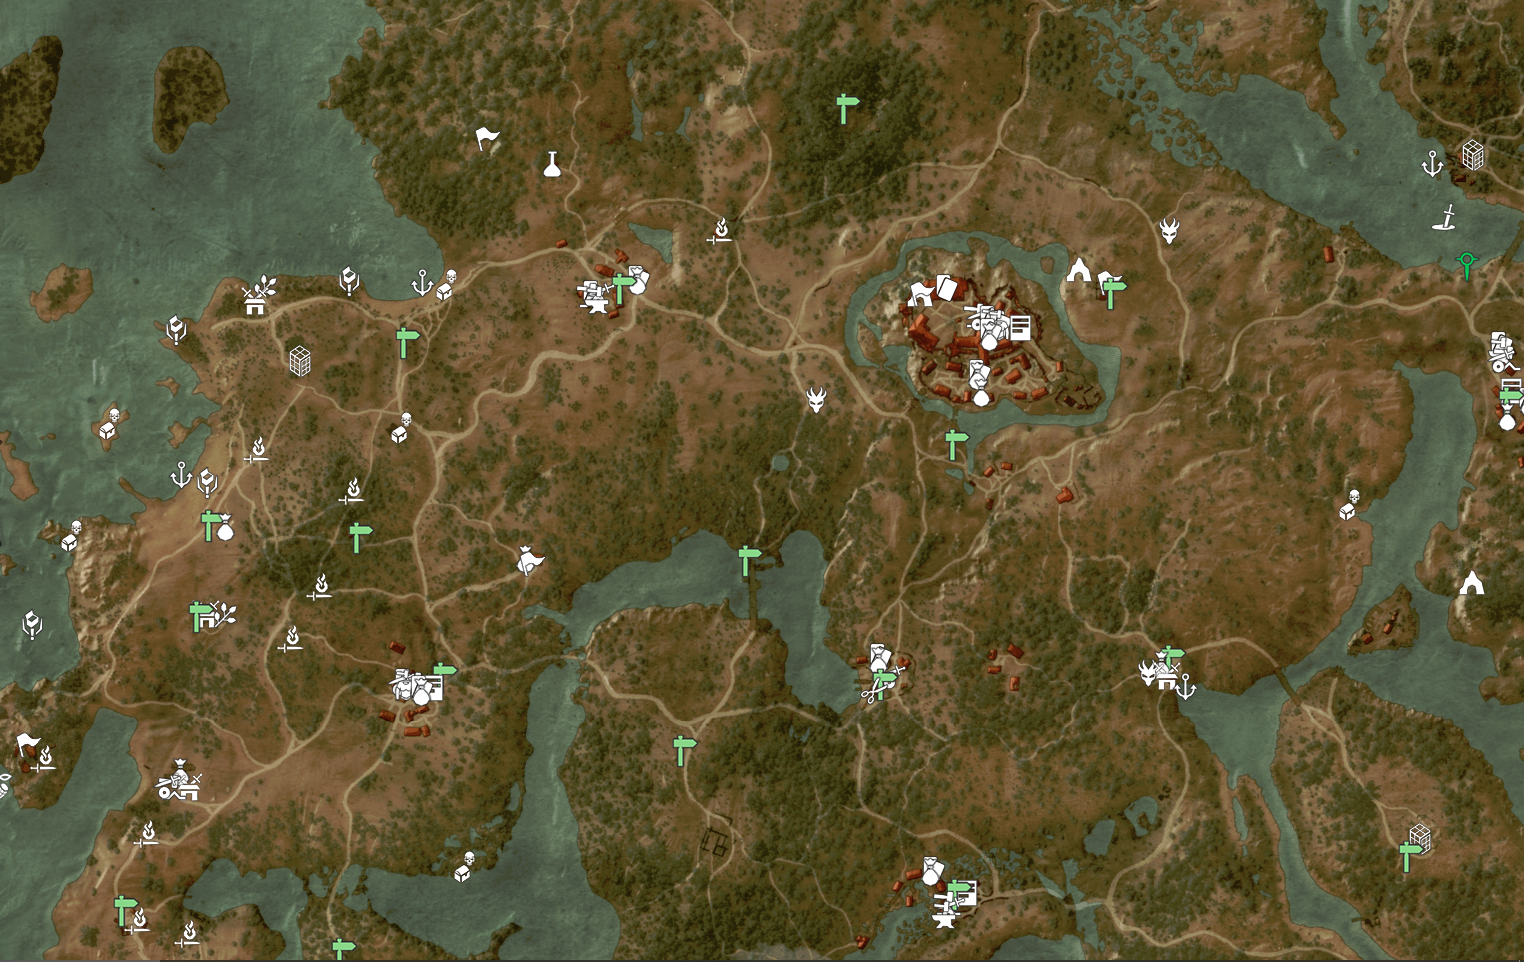 A map from The Witcher 3: The Wild Hunt. It shows many landmarks and markers indicating content upon it.